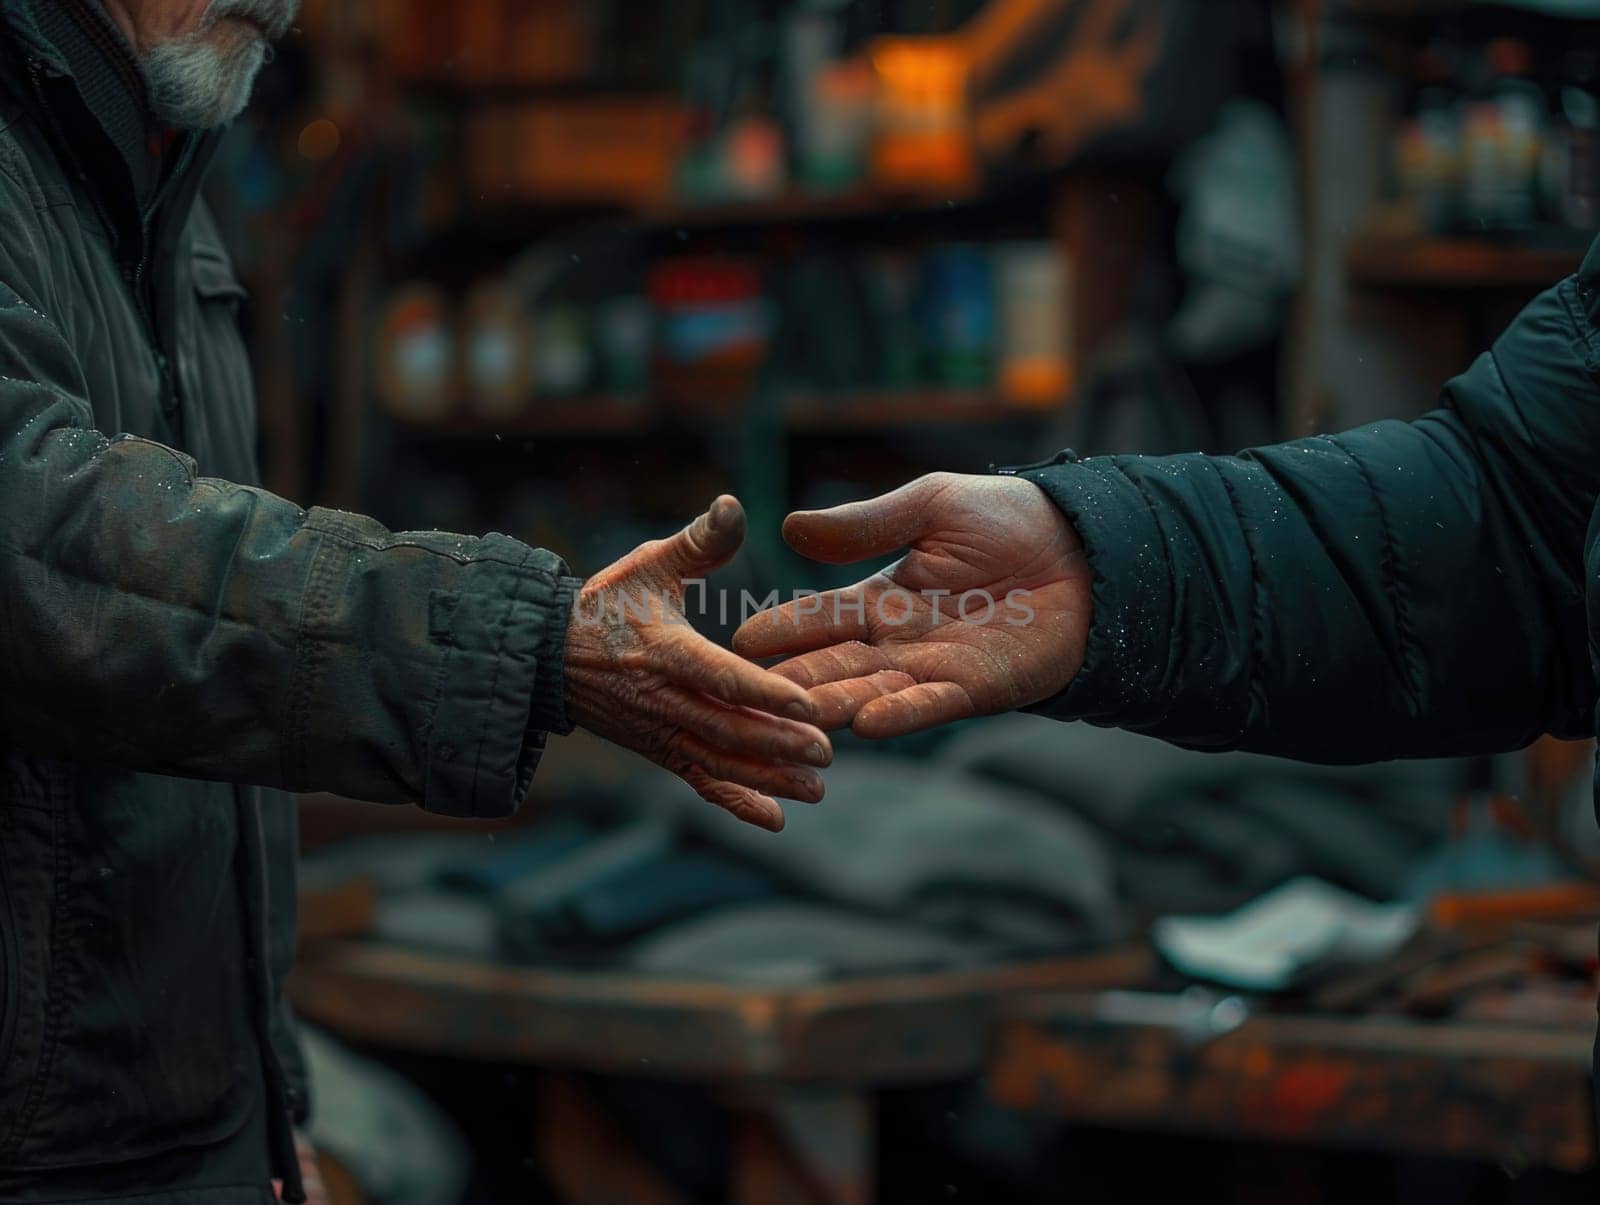 A close-up view of a handshake between two people signifies trust, agreement, and partnership.